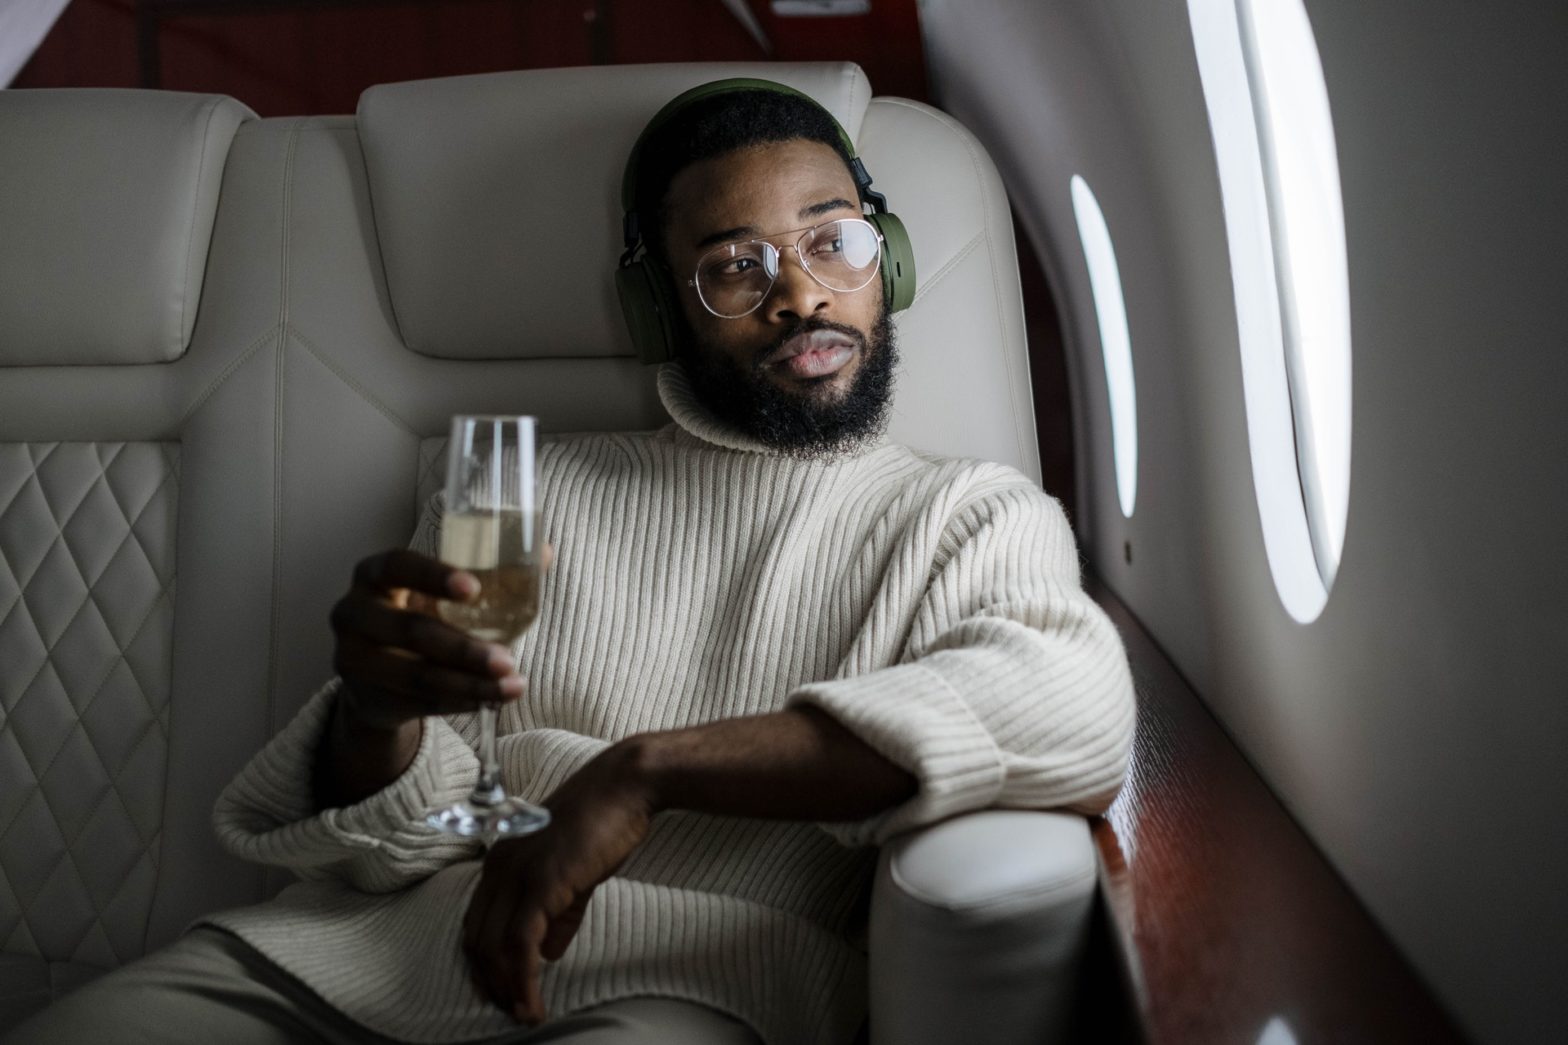 First Class And Business Class: Are They Worth It?